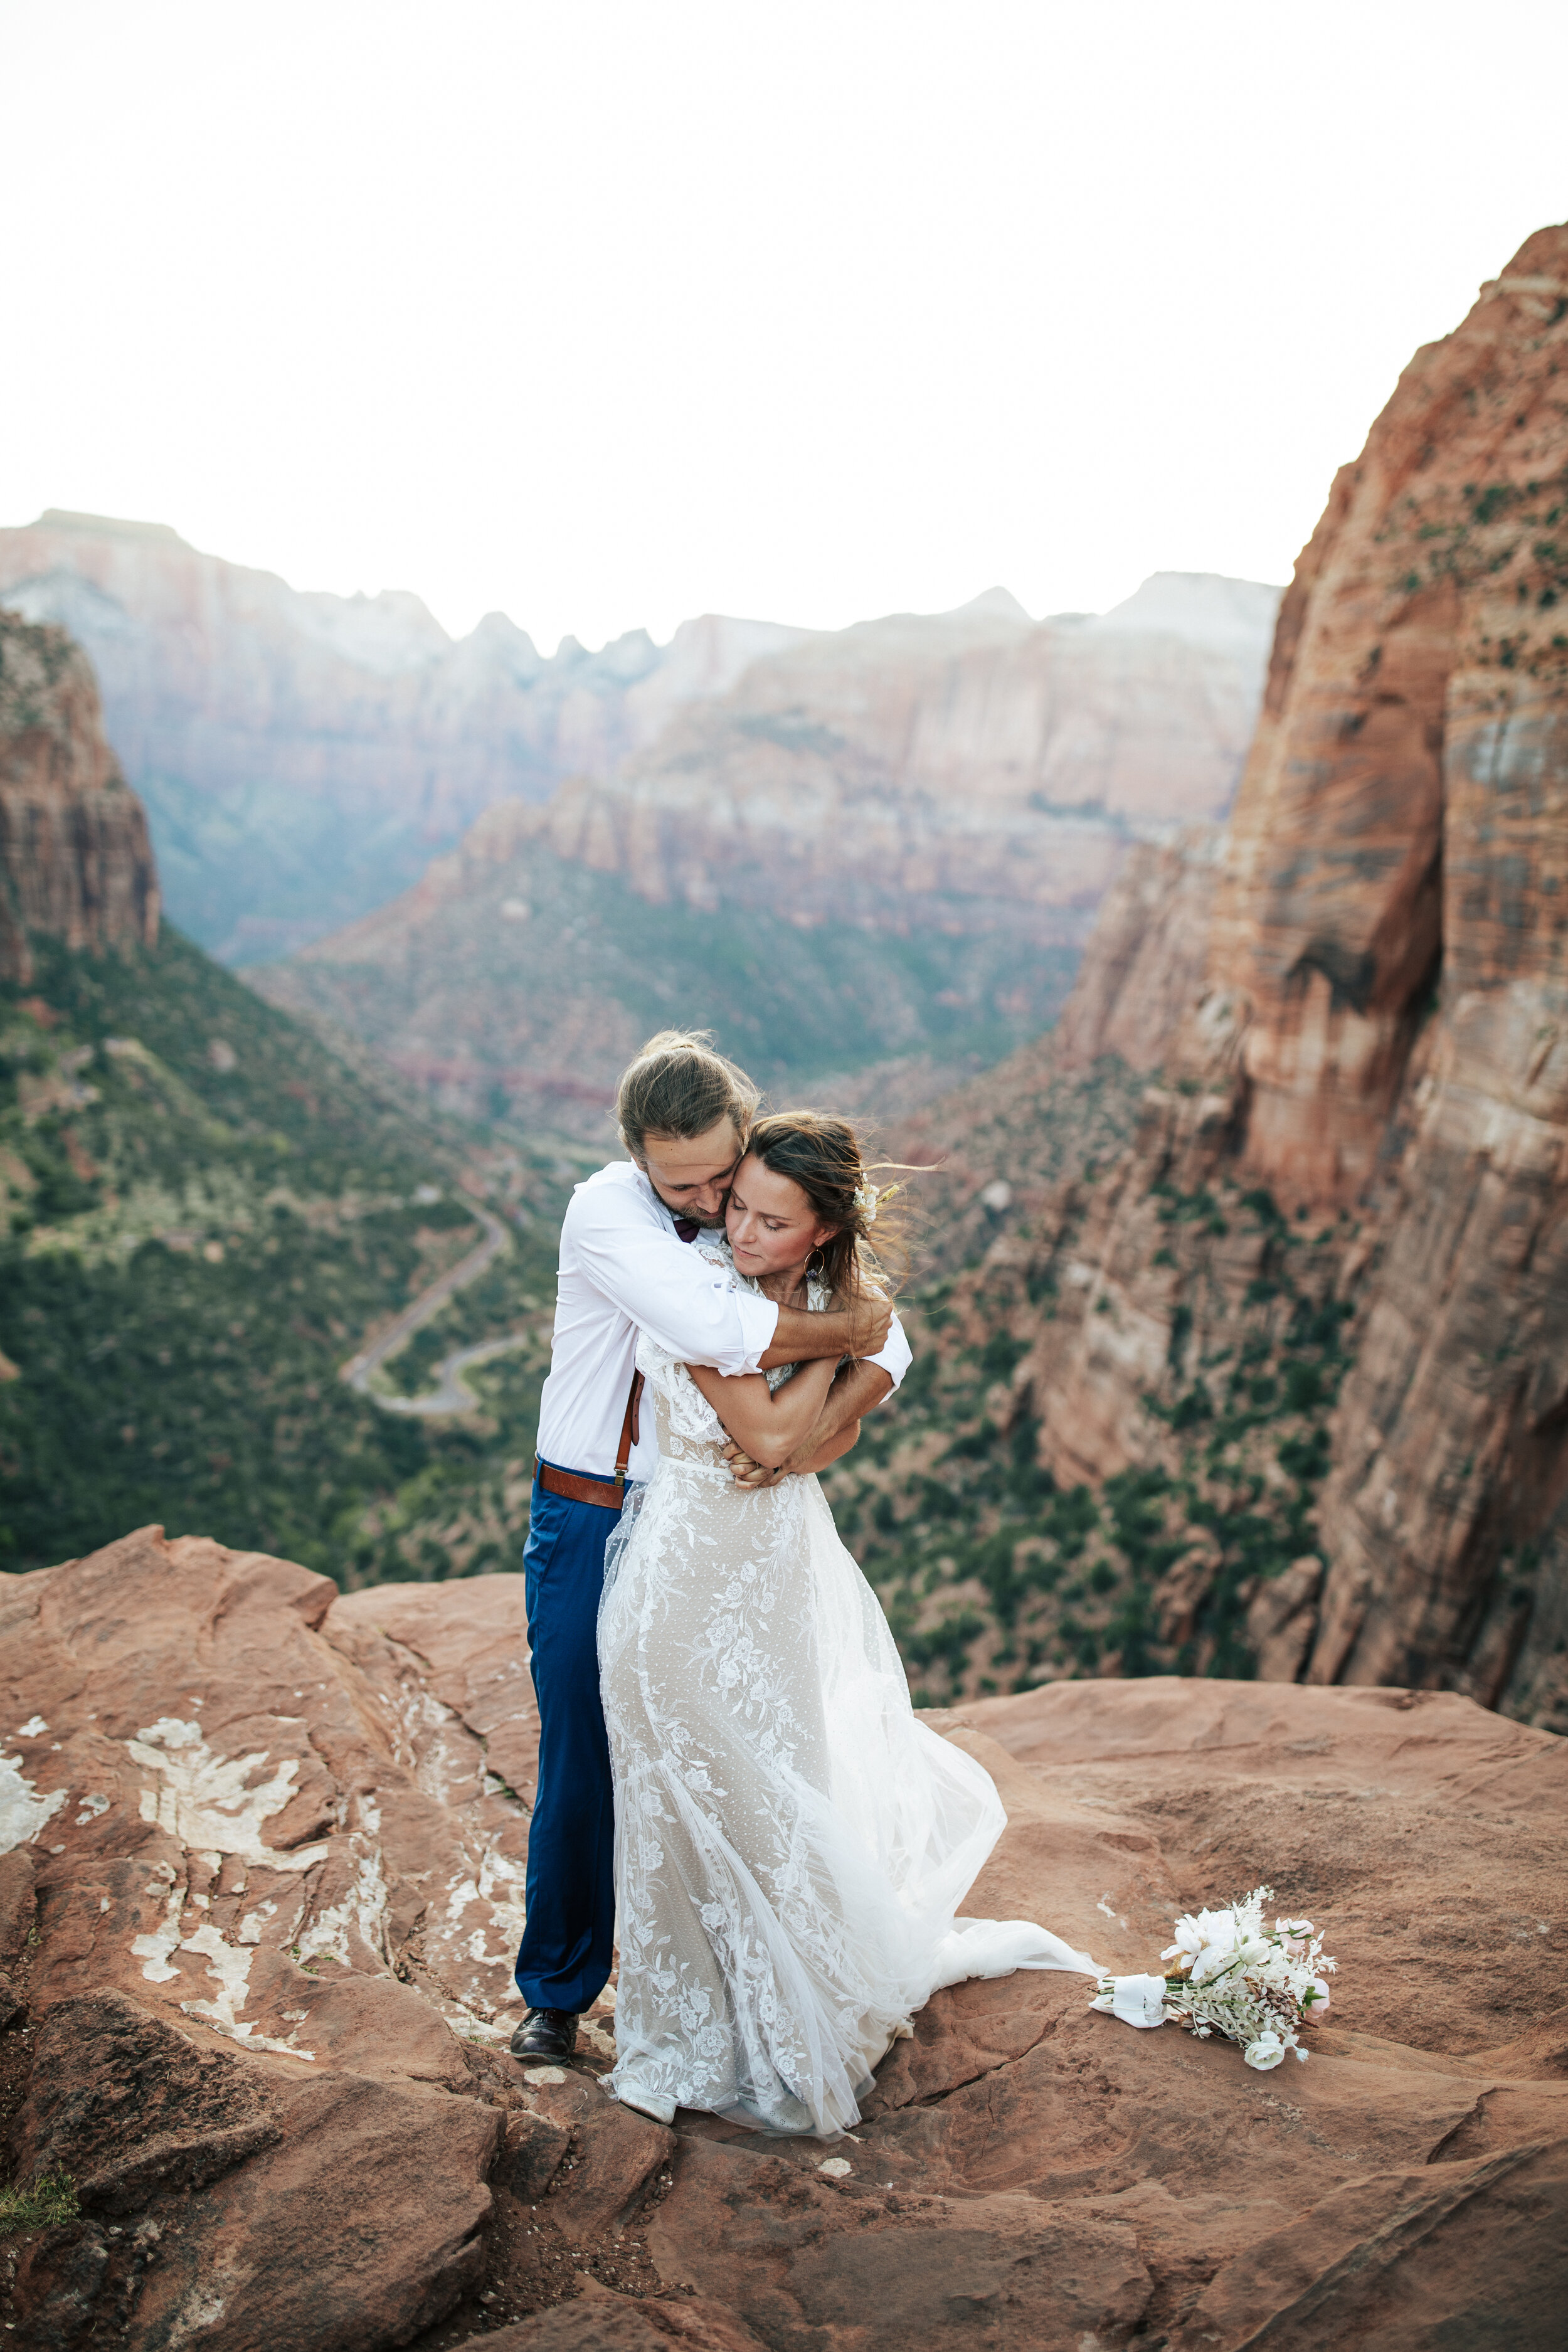  A handsome groom hugs his beautiful bride on the rocks of Zion National Park, Utah in a stunning elopement styled photo shoot by professional wedding photographer Emily Jenkins Photography. Couple pose inspiration ideas and goals outdoor photo shoot